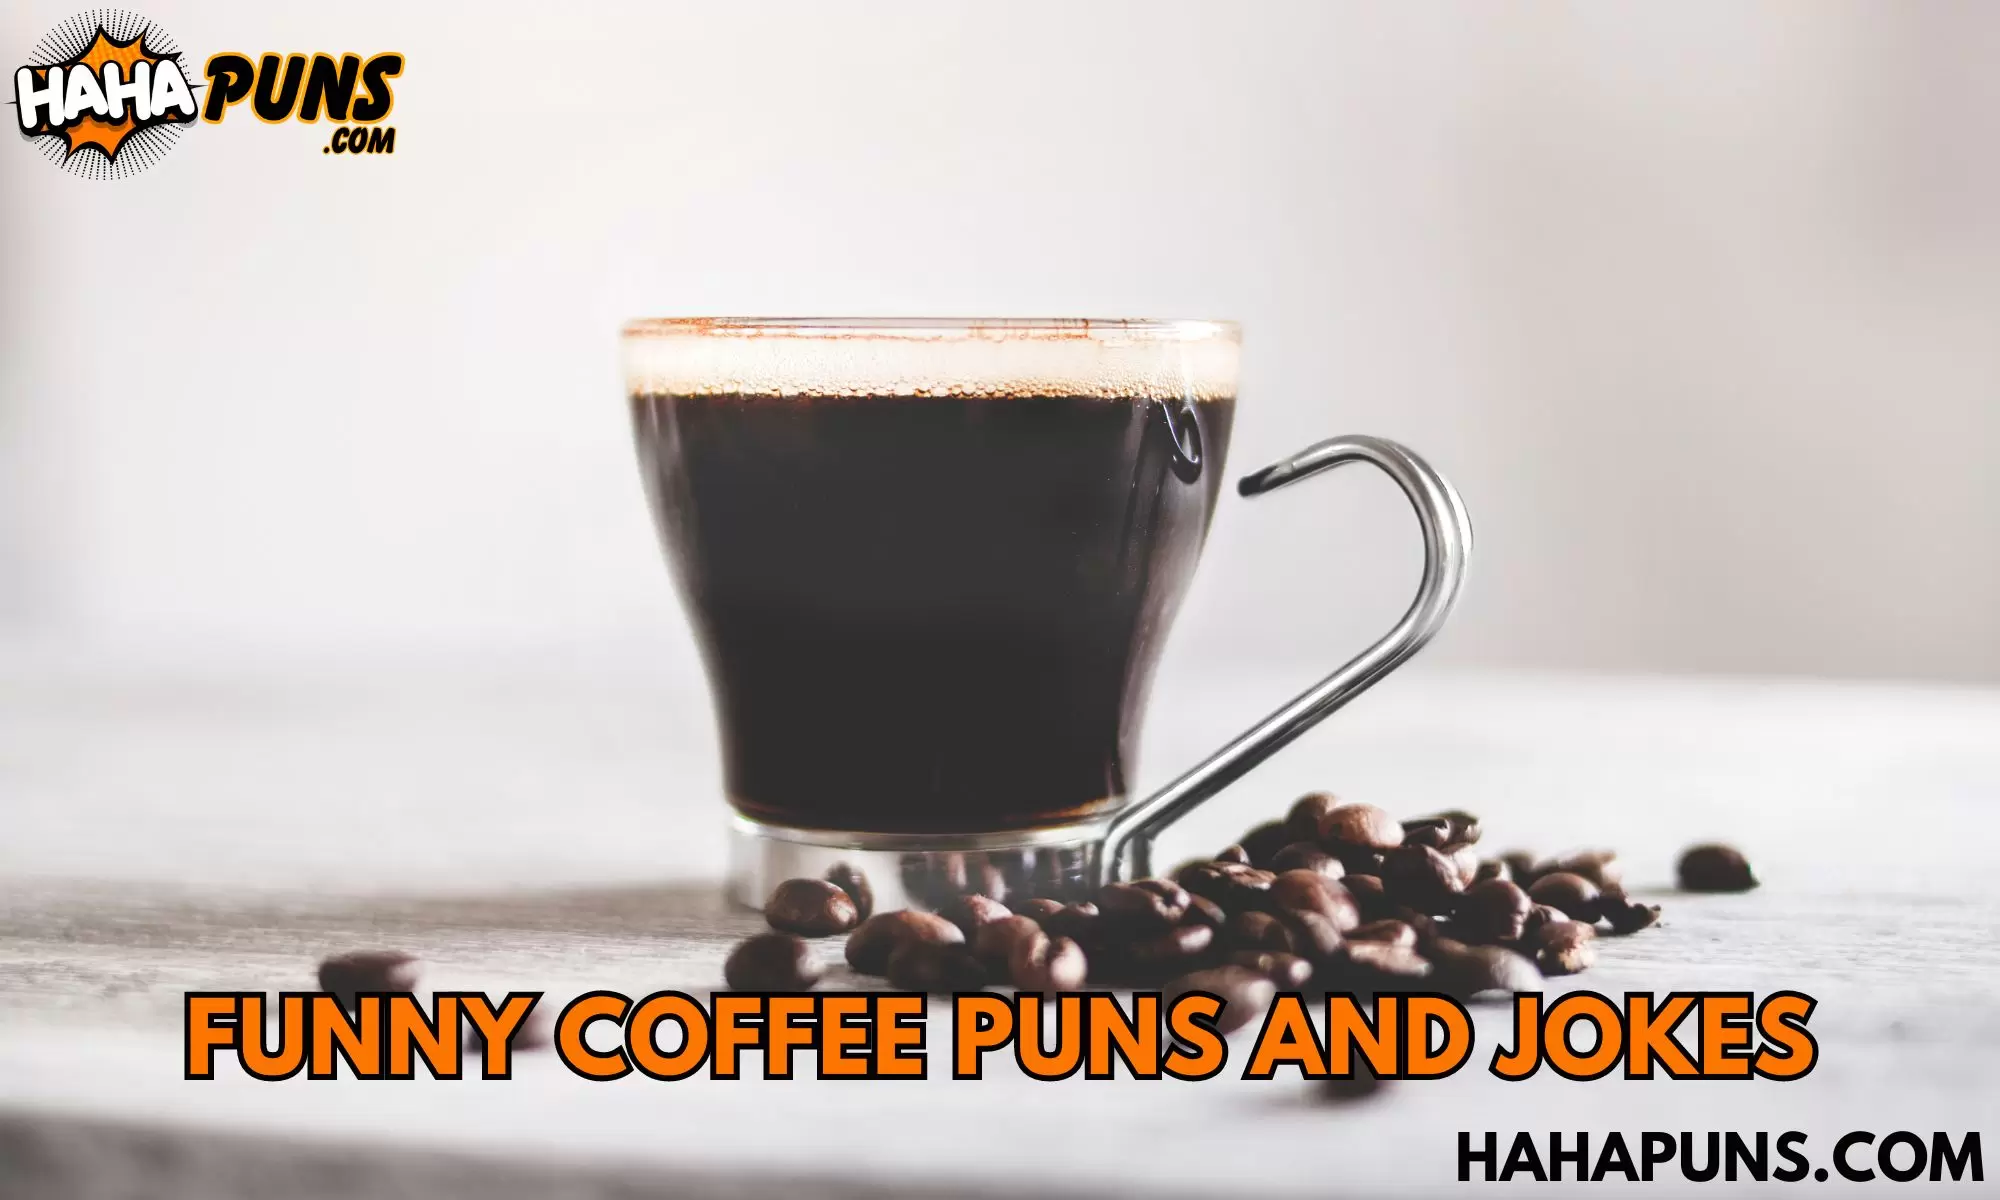 Funny Coffee Puns and Jokes